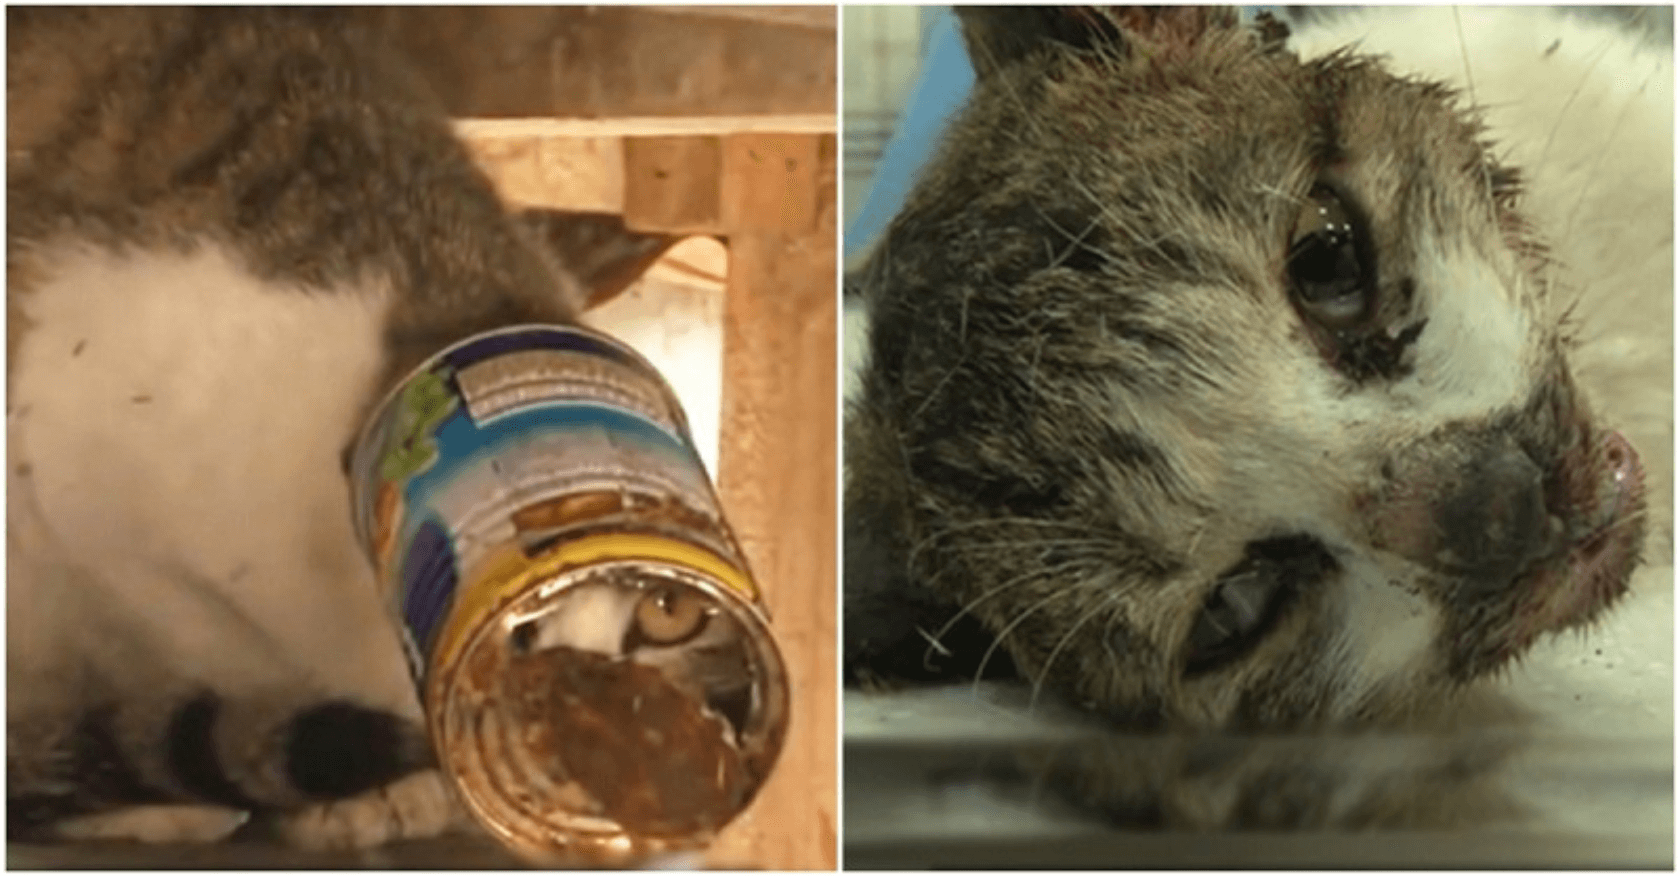 Poor cat, whose head was stuck in a tin box for days: "It's scared, so it keeps trying to stay away from people"